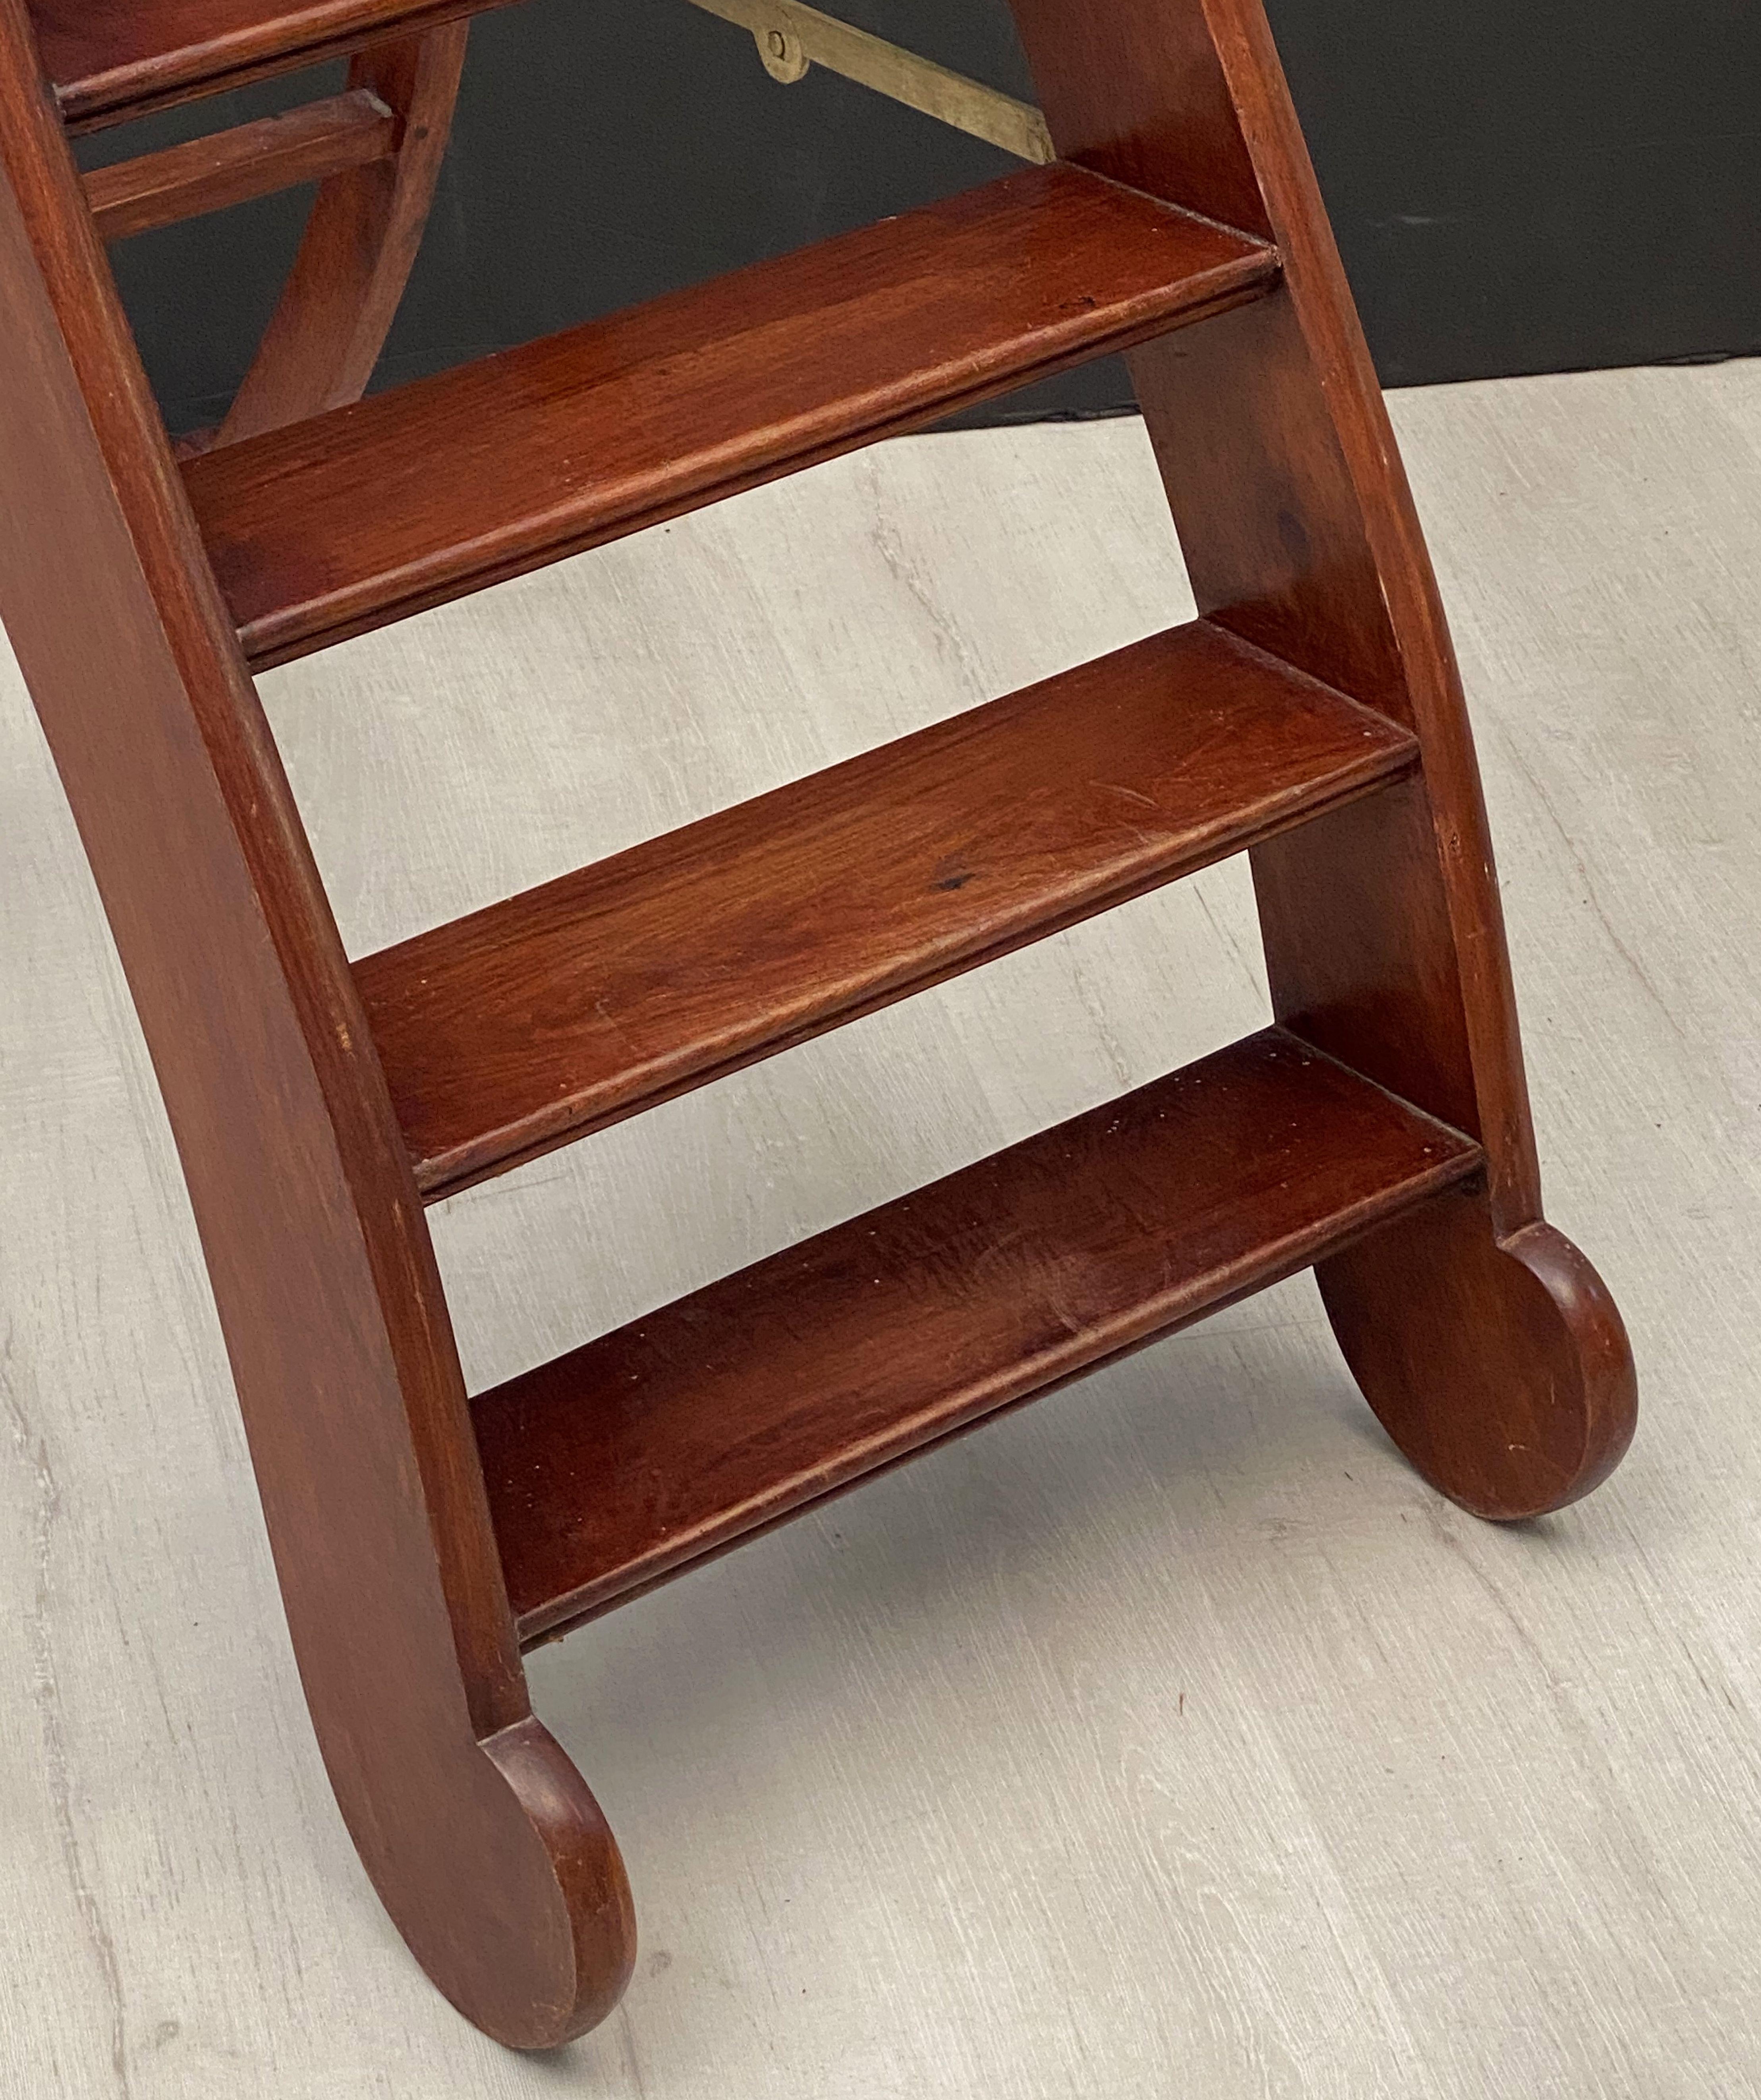 Metal English Folding Library Step Ladder of Mahogany and Brass from the Edwardian Era